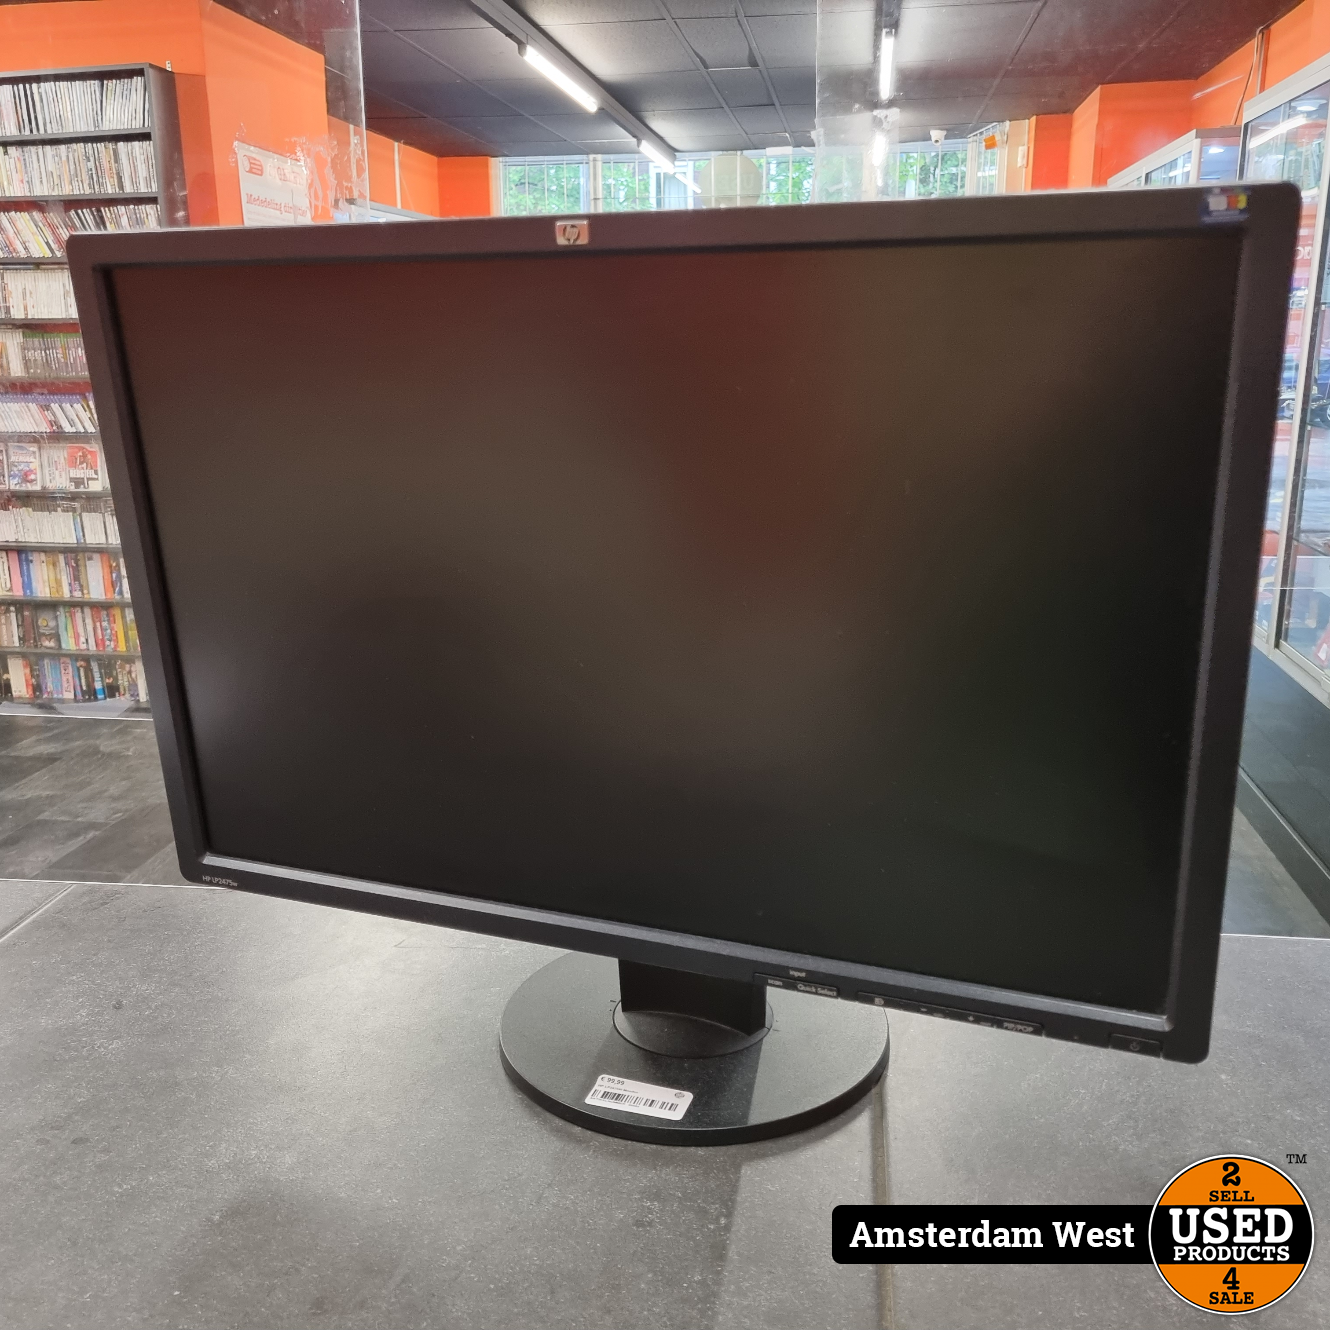 slachtoffers dennenboom Geloofsbelijdenis HP LP2475W Monitor 24 Inch HDMI Full HD Monitor - Used Products Amsterdam  West